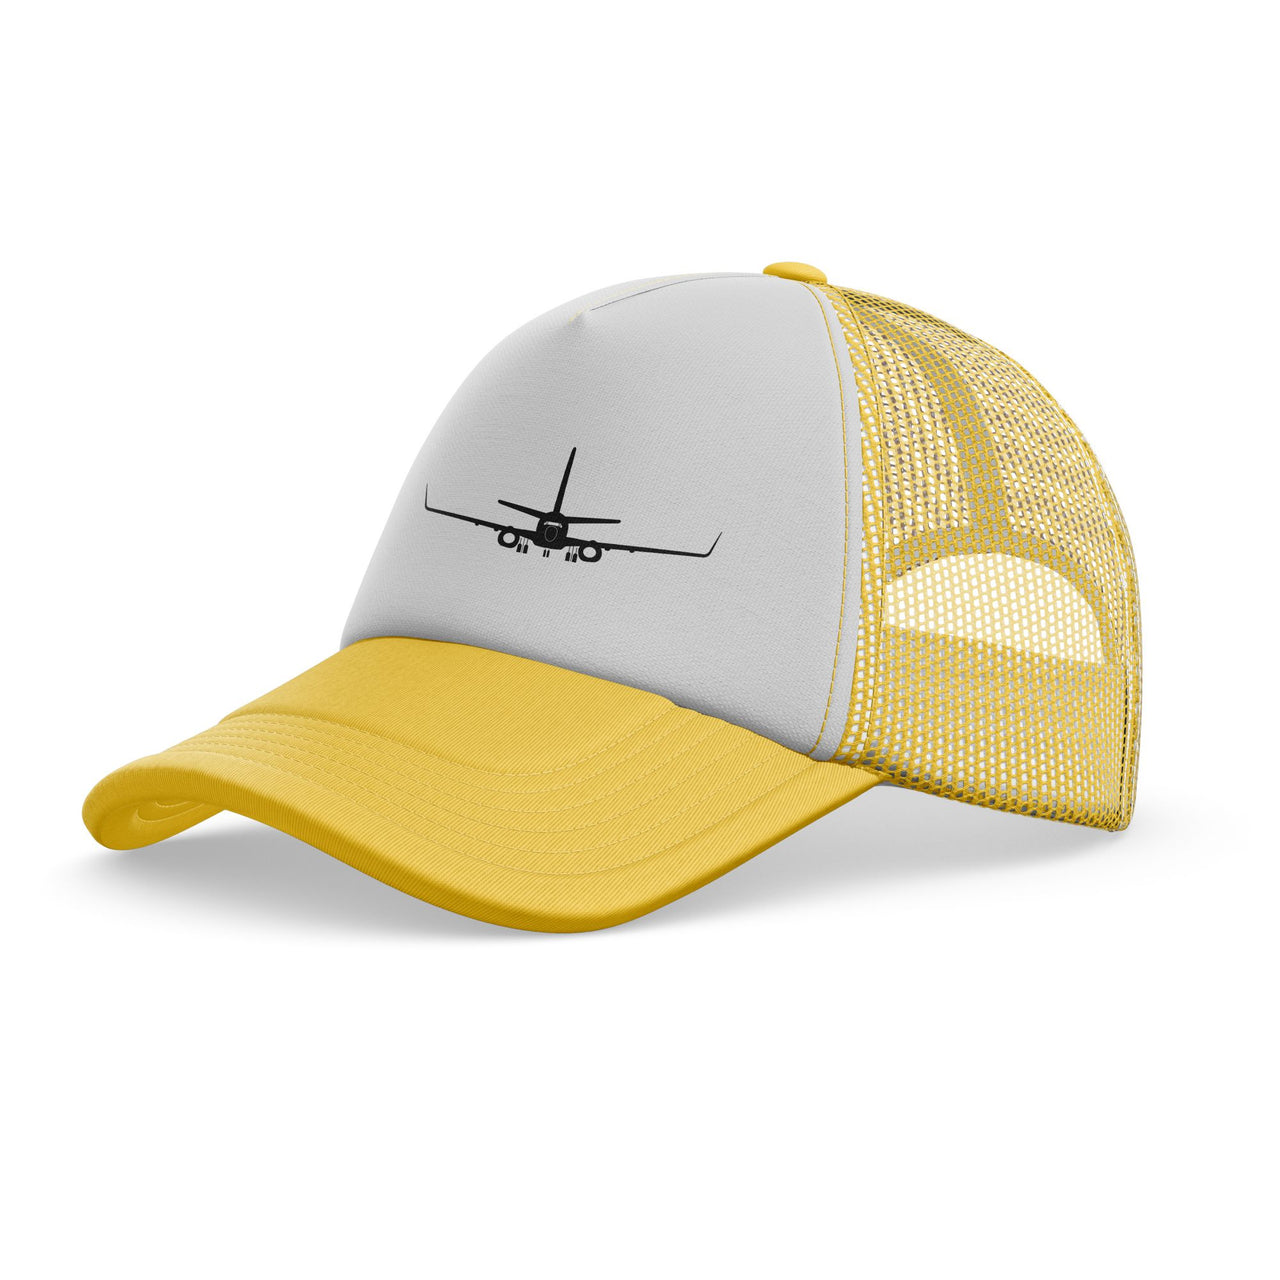 Boeing 737-800NG Silhouette Designed Trucker Caps & Hats